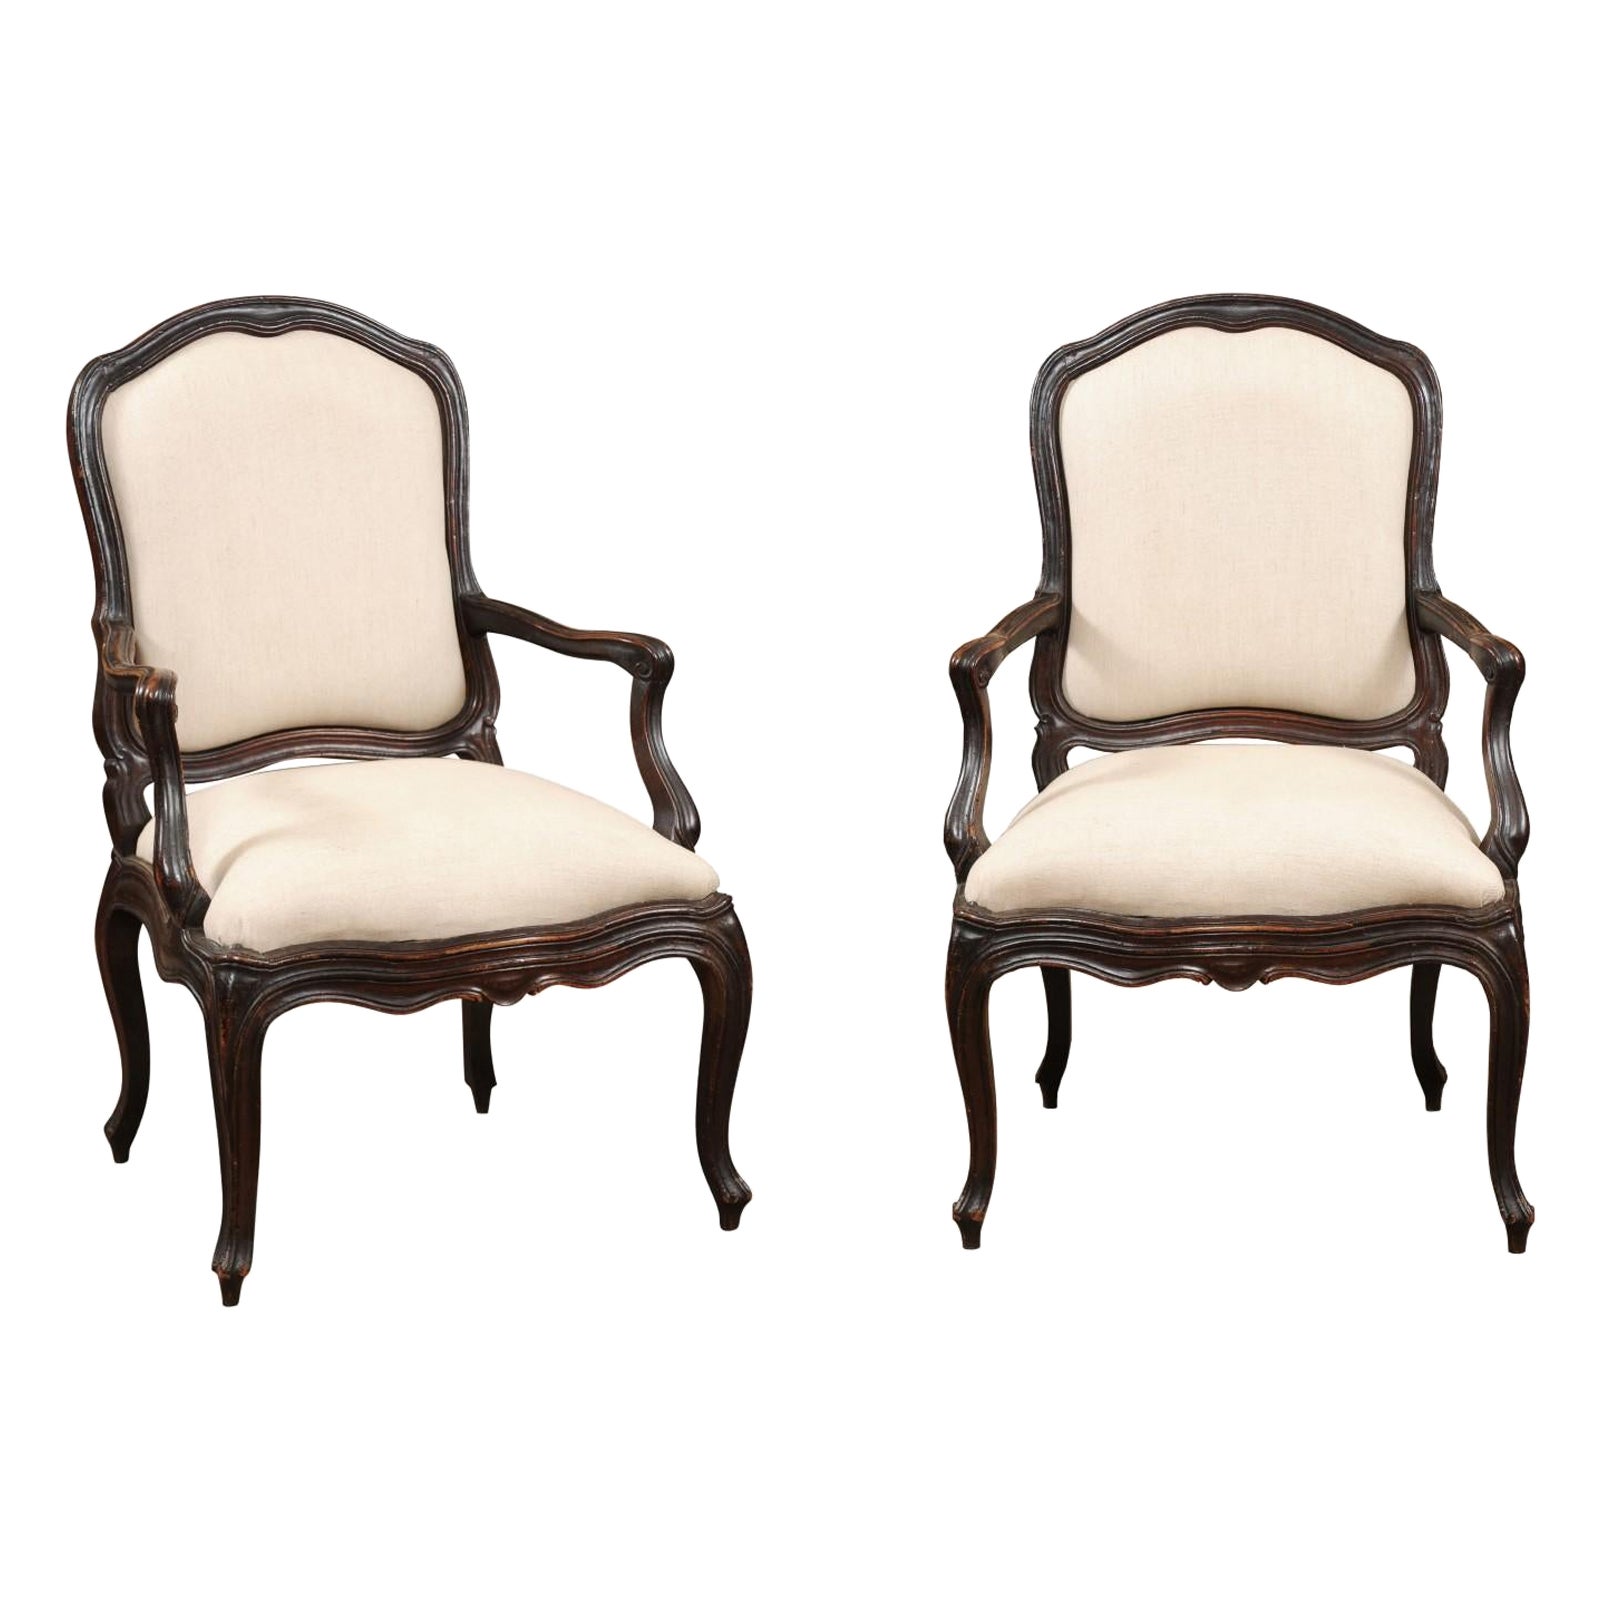 Pair of Rococo Period Walnut Armchairs, Genova, Italy Mid-18th Century For Sale